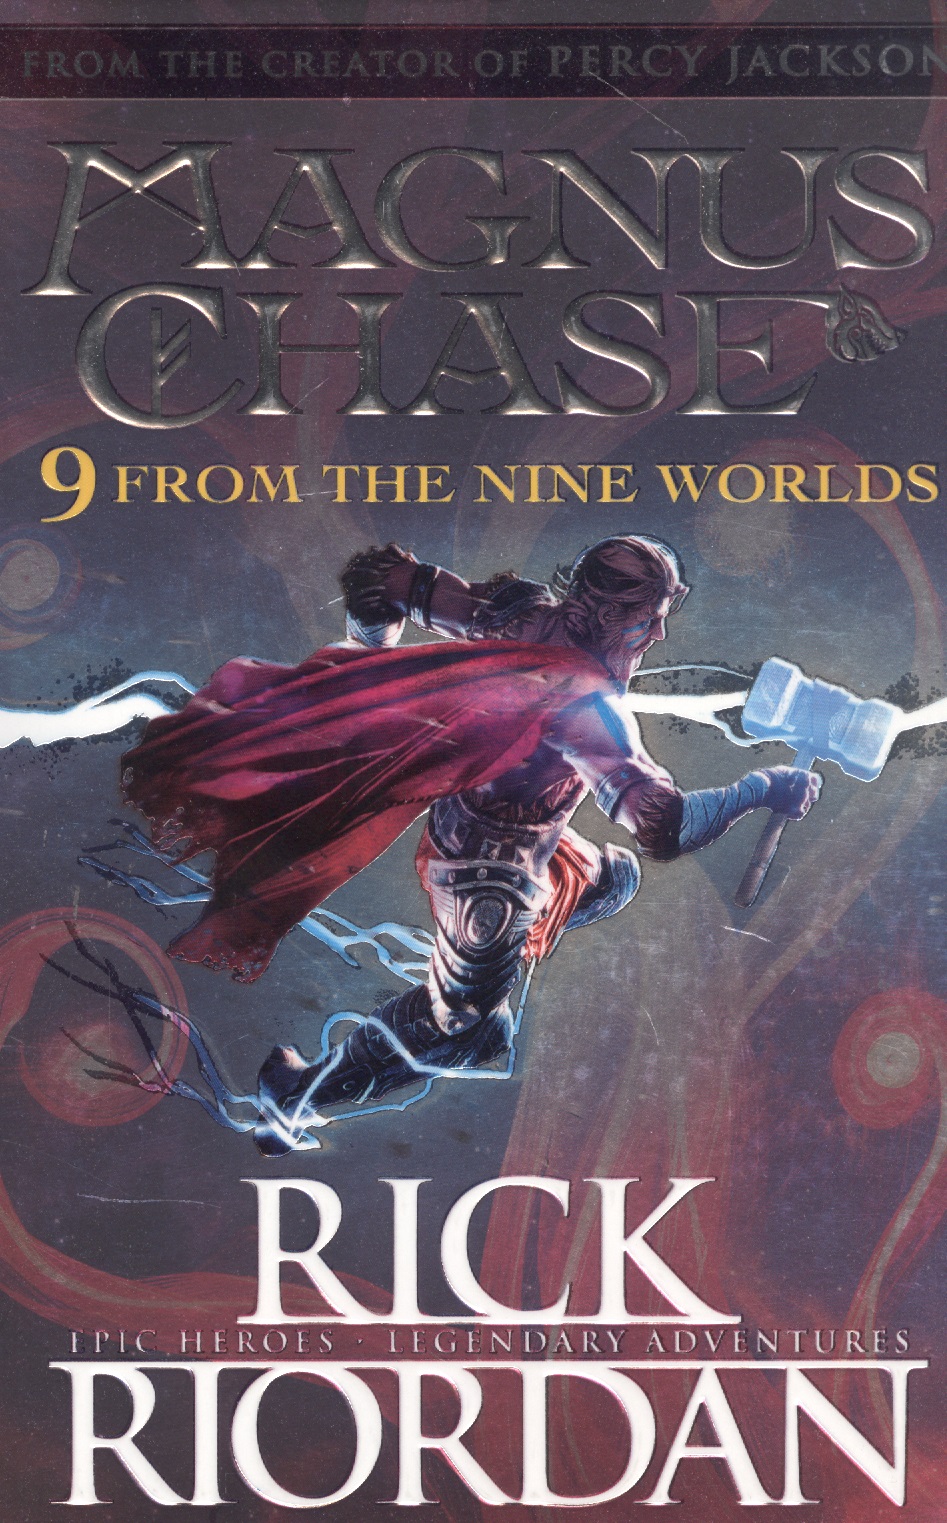 riordan r magnus chase and the ship of the dead Riordan Rick 9 From the Nine Worlds